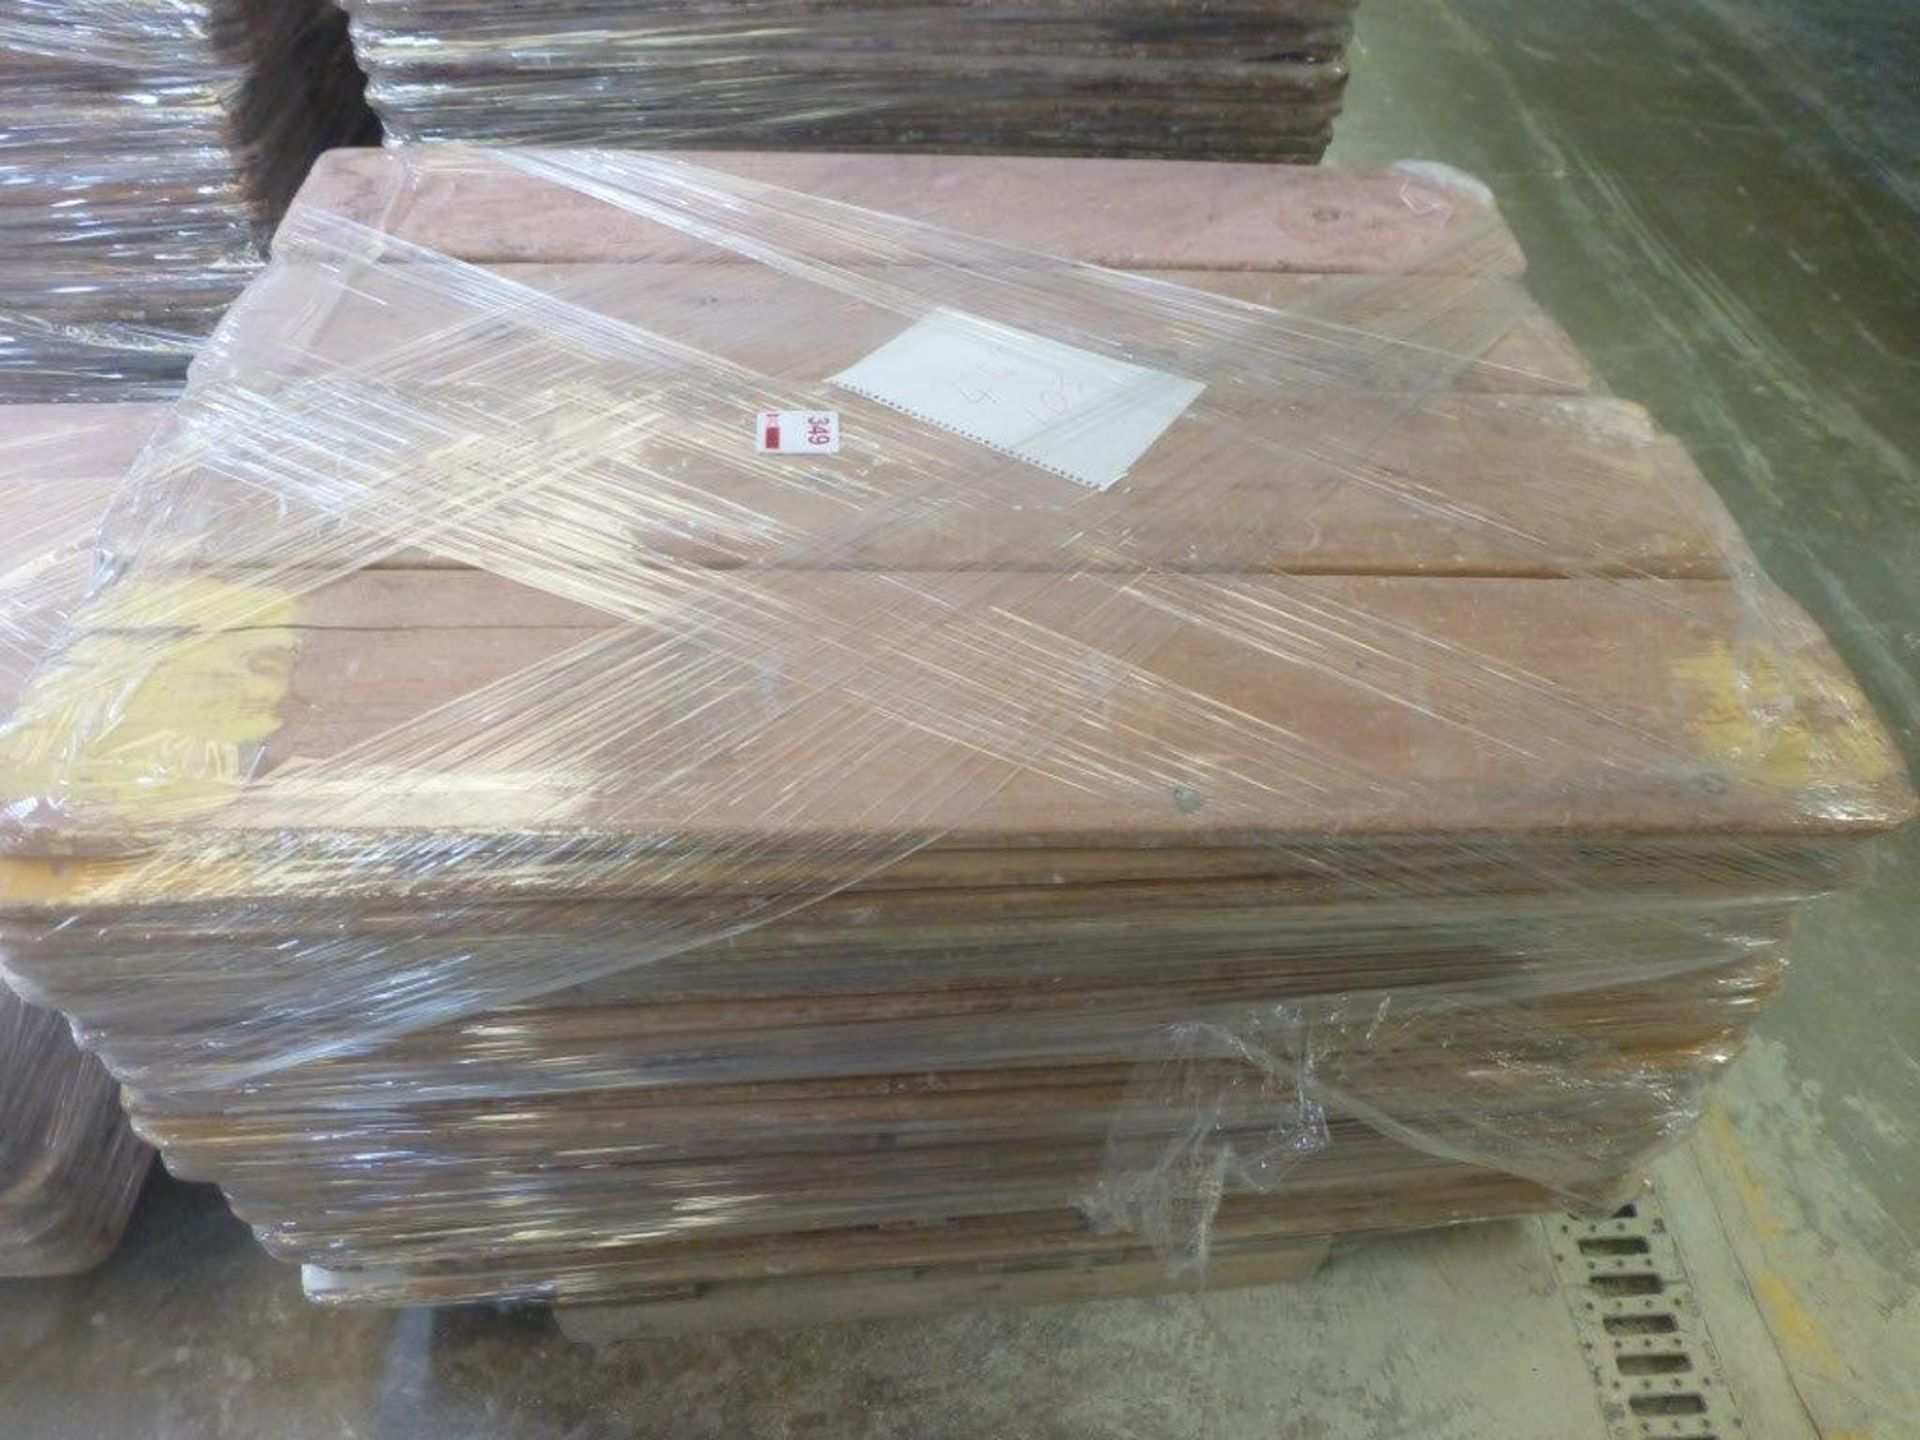 103 x 4' 4" ware boards on one pallet